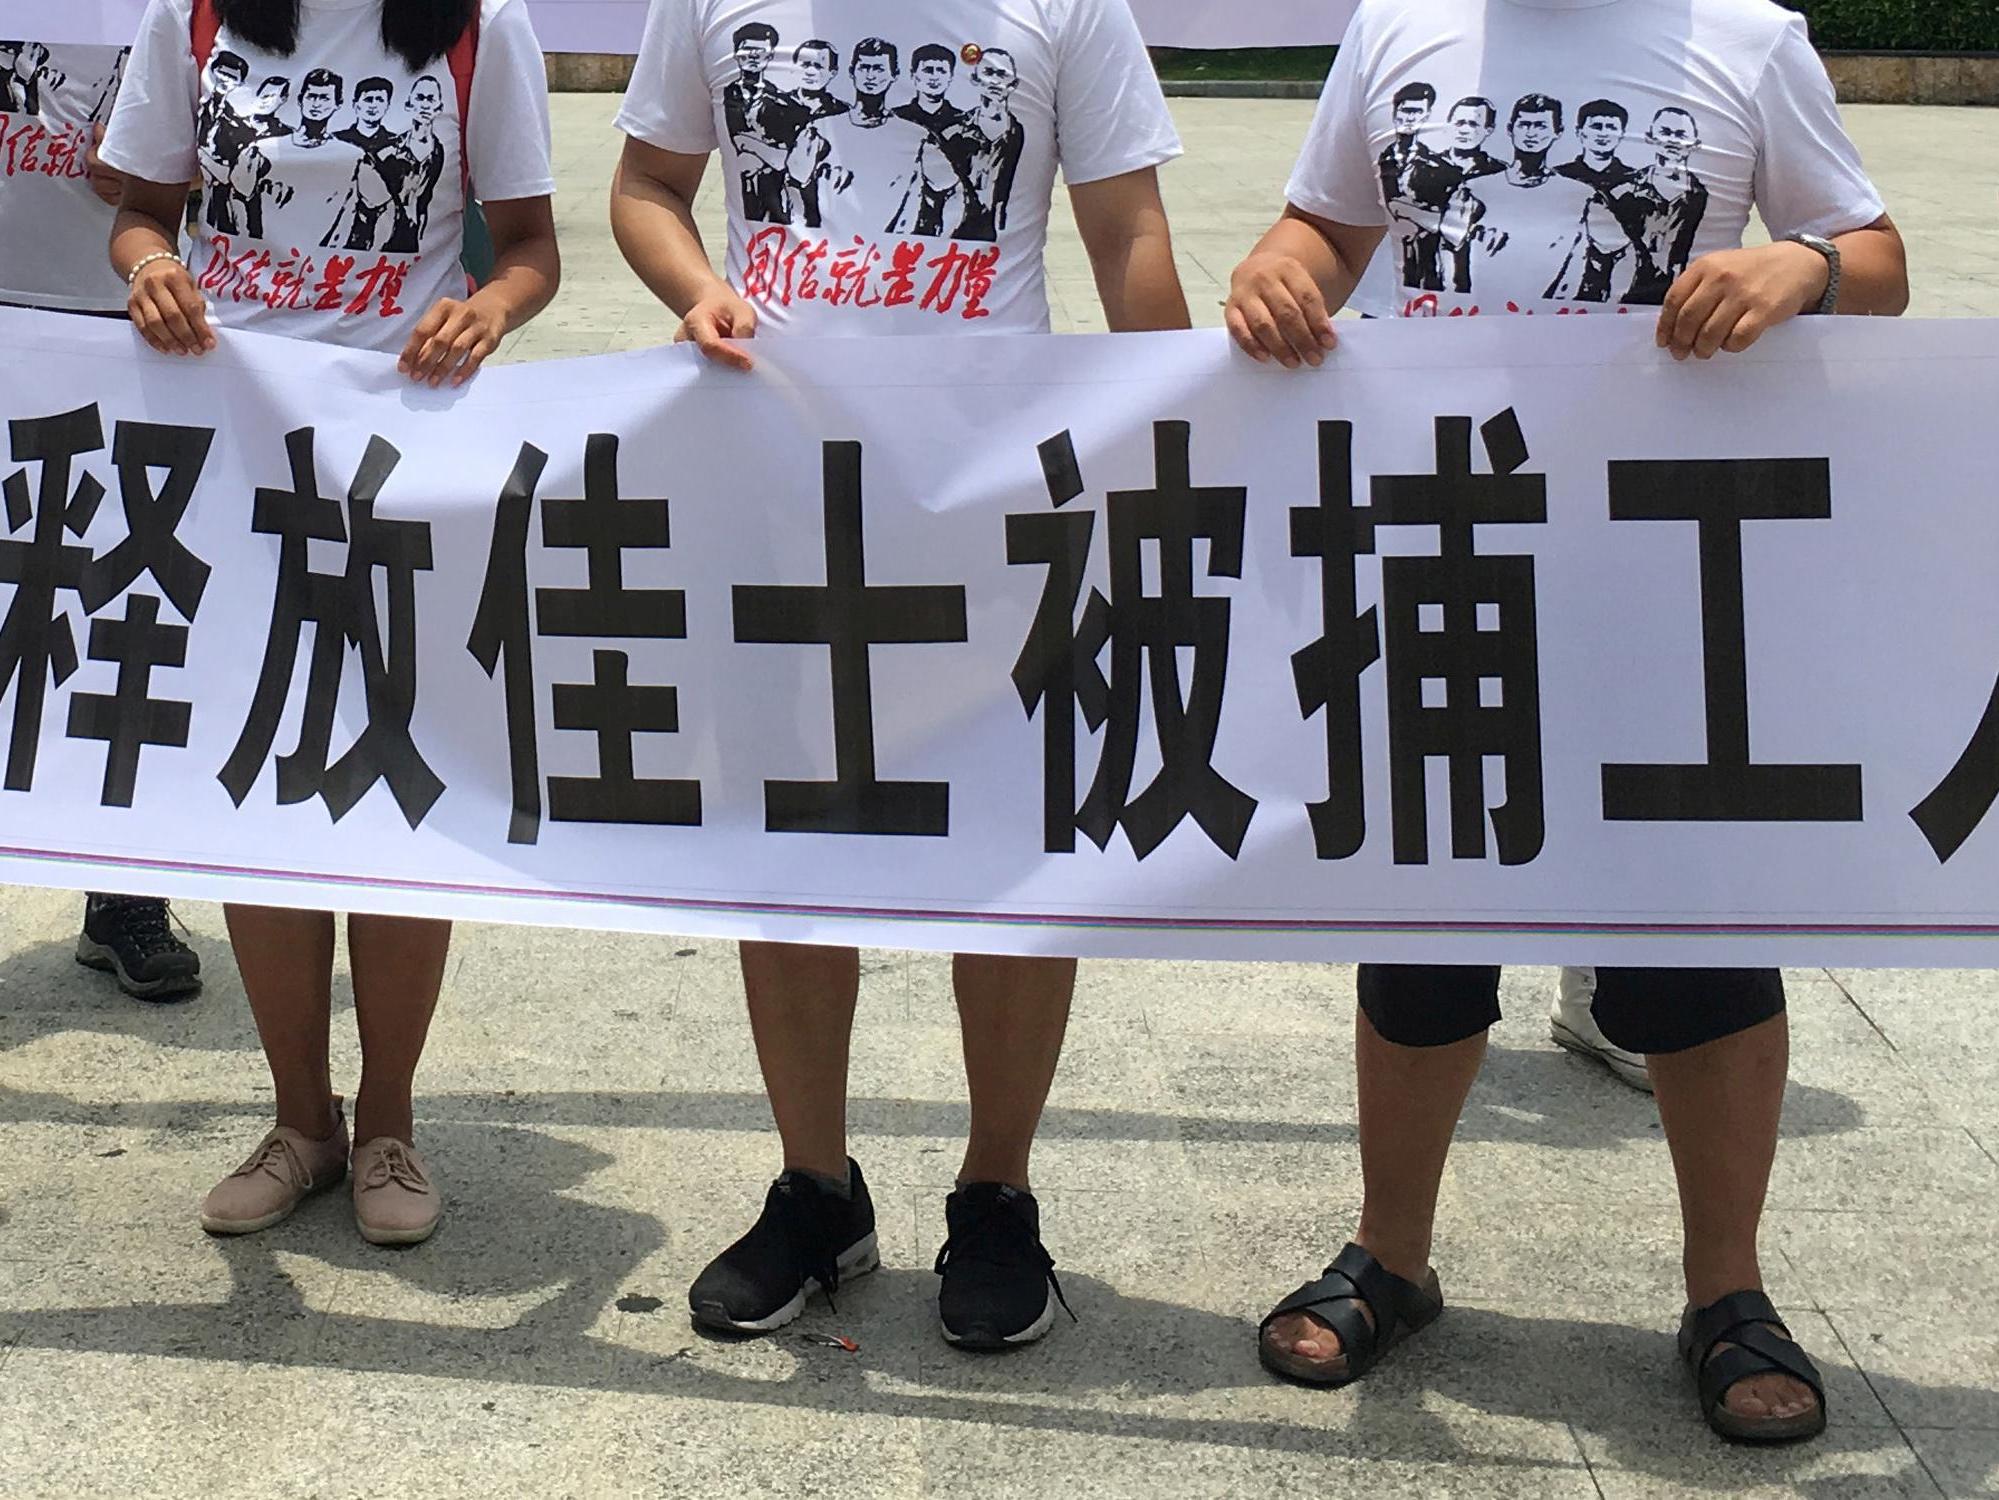 People hold banners at a demonstration in support of factory workers of Jasic Technology, in Pingshan district, China on 6 August 2018